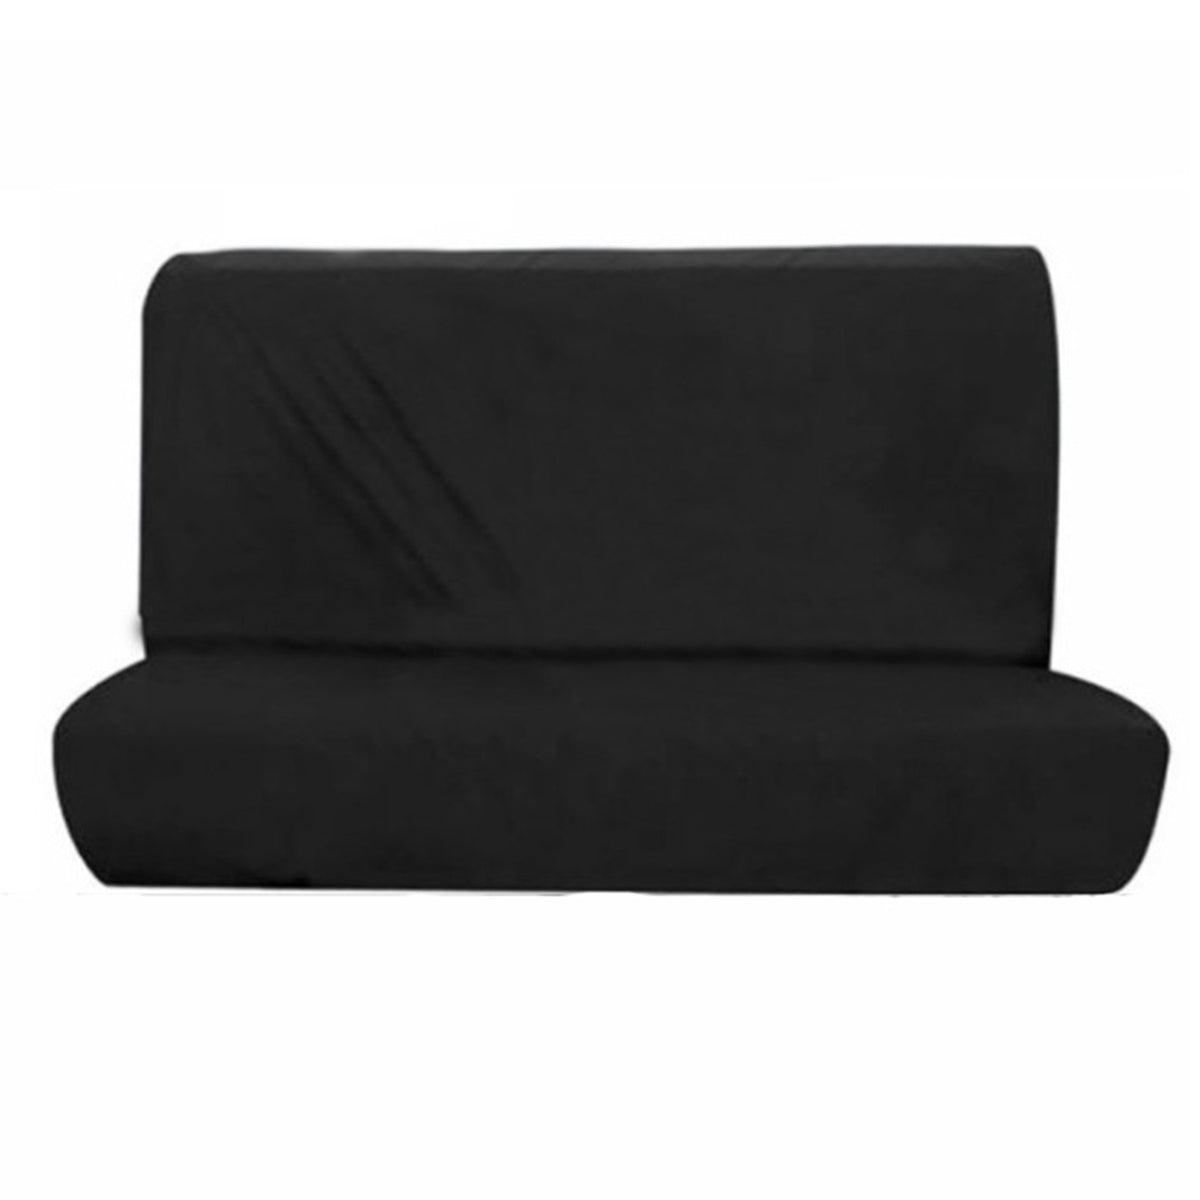 Black Universal Car Front Rear Seat Cover Anti Dust Waterproof Vehicle Protector (Set)